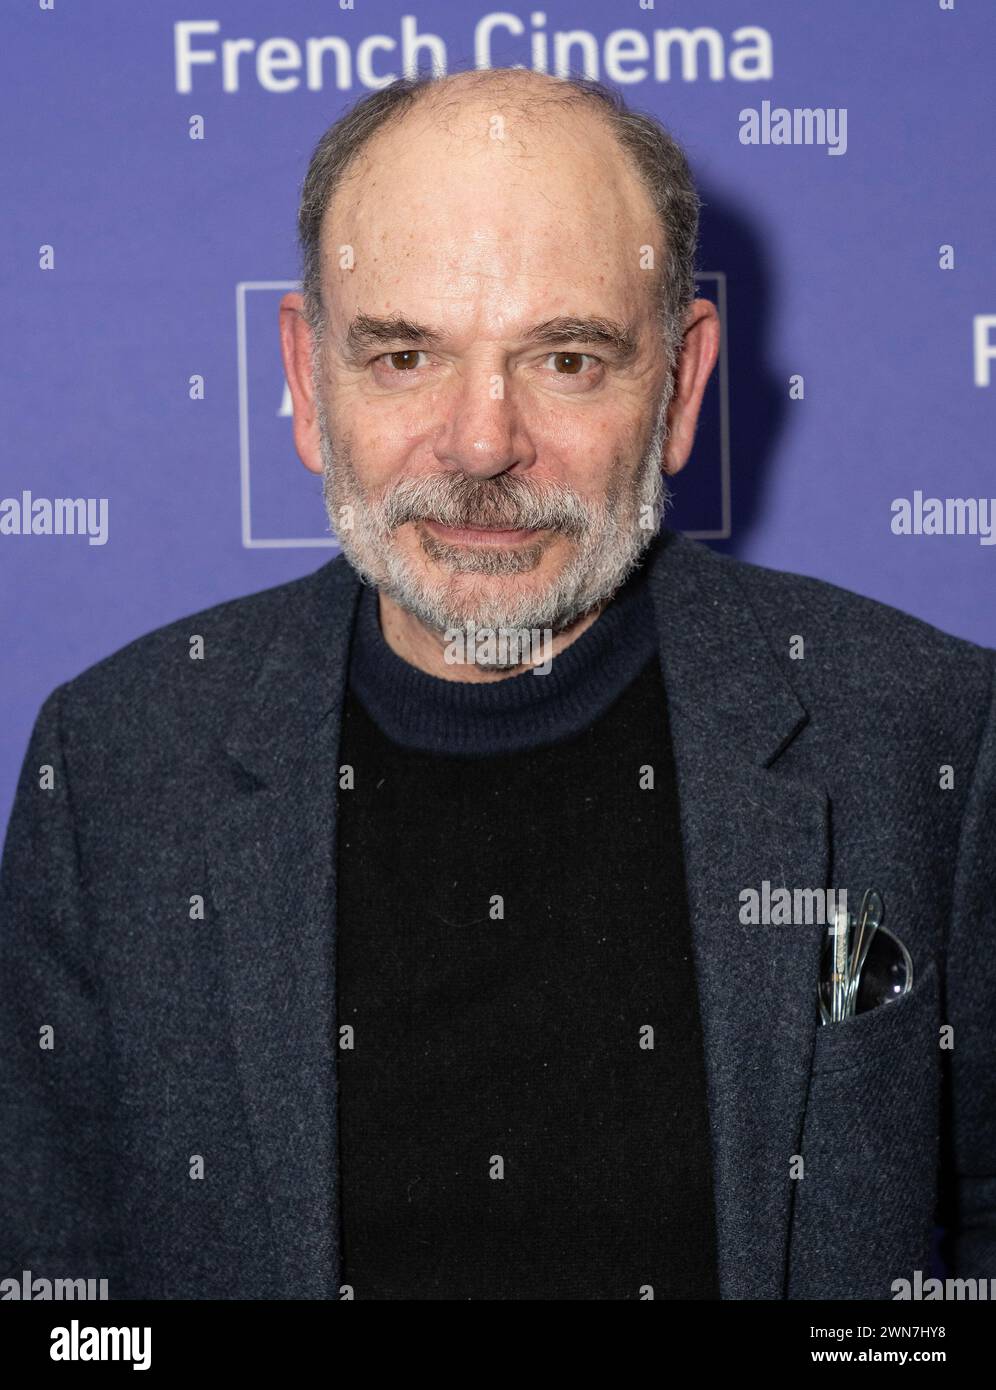 New York, USA. 29th Feb, 2024. Jean Pierre Darroussin attends the opening night of 29th Rendez-Vous With French Cinema Showcase at Walter Reade Theater in New York on February 29, 2024. (Photo by Lev Radin/Sipa USA) Credit: Sipa USA/Alamy Live News Stock Photo